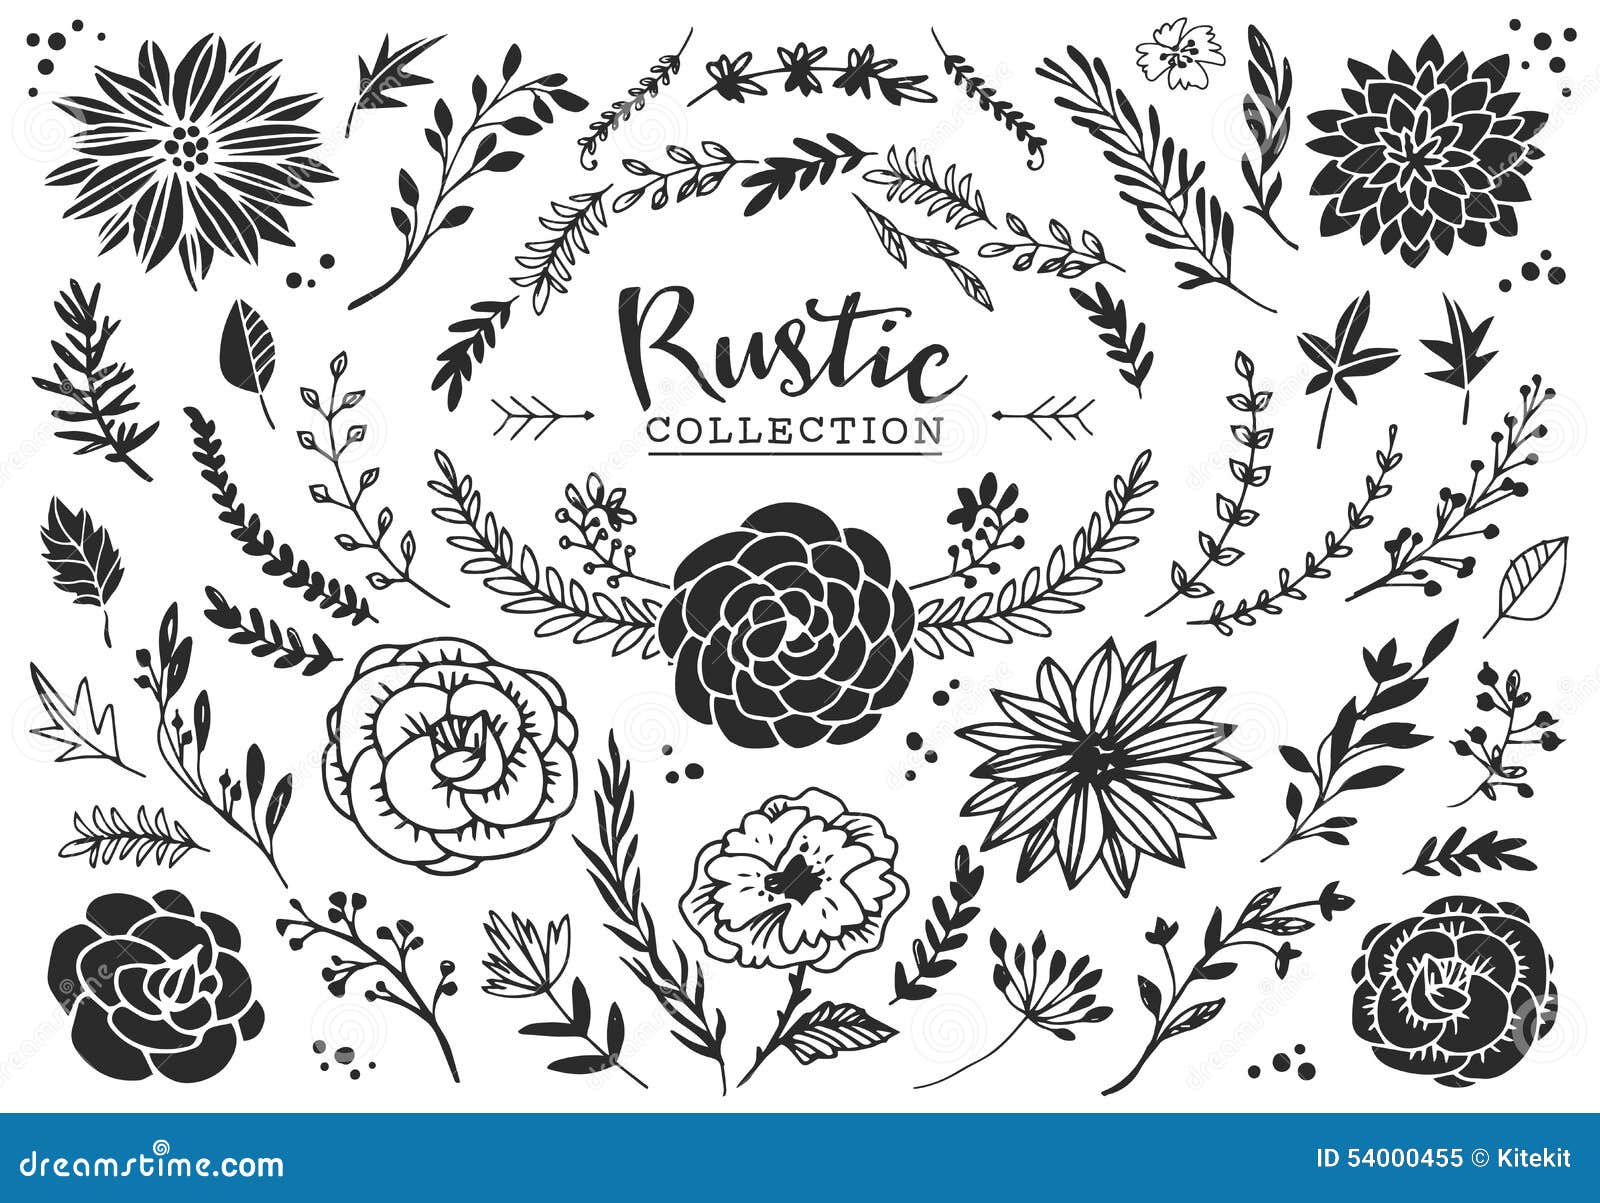 rustic decorative plants and flowers collection. hand drawn